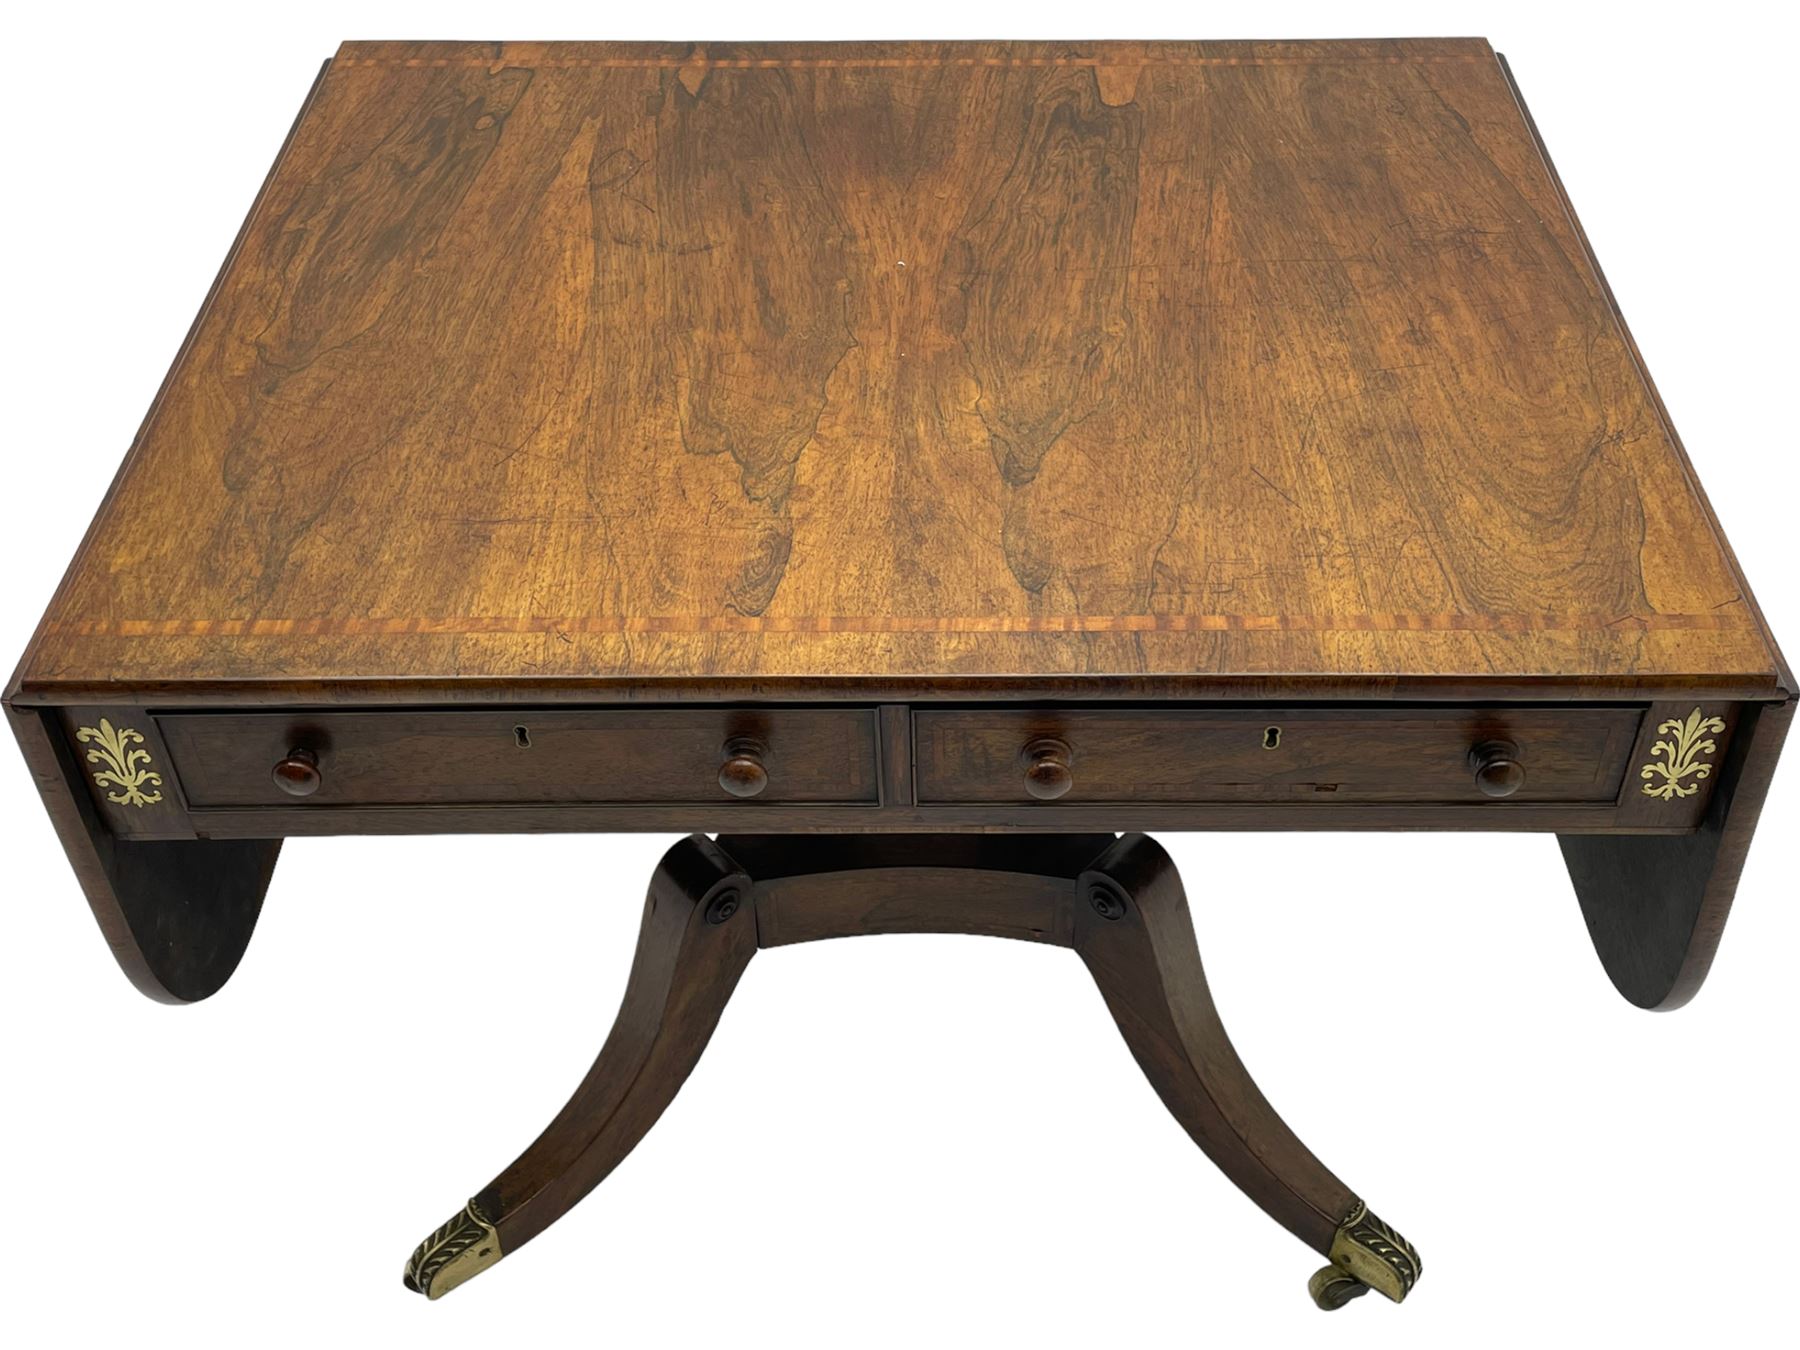 Regency rosewood and brass inlaid sofa table - Image 9 of 11